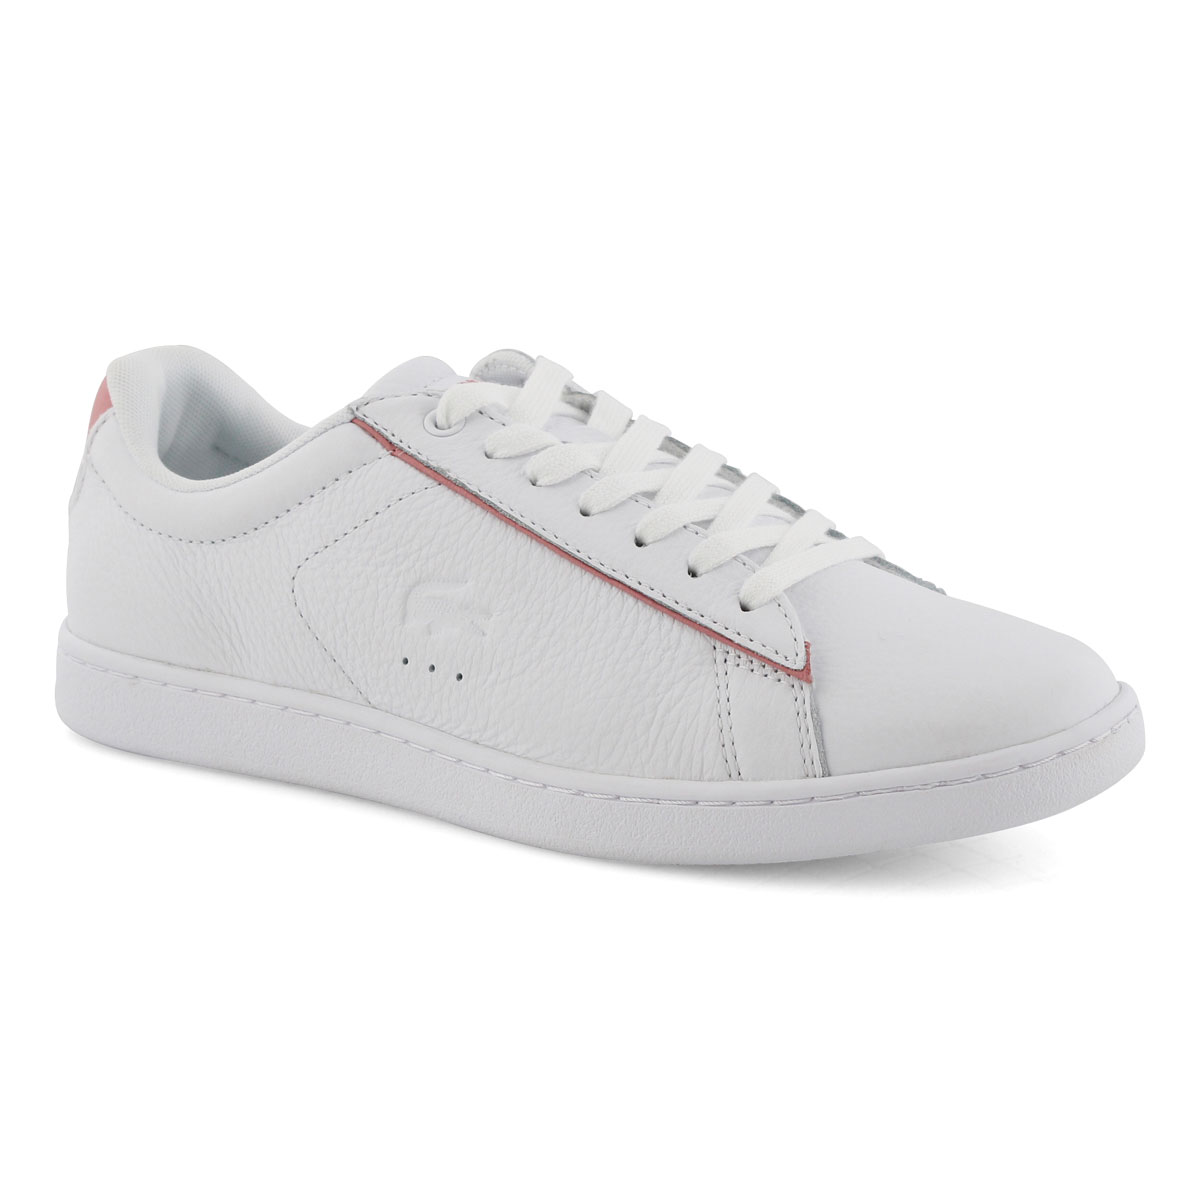 lacoste white pink shoes